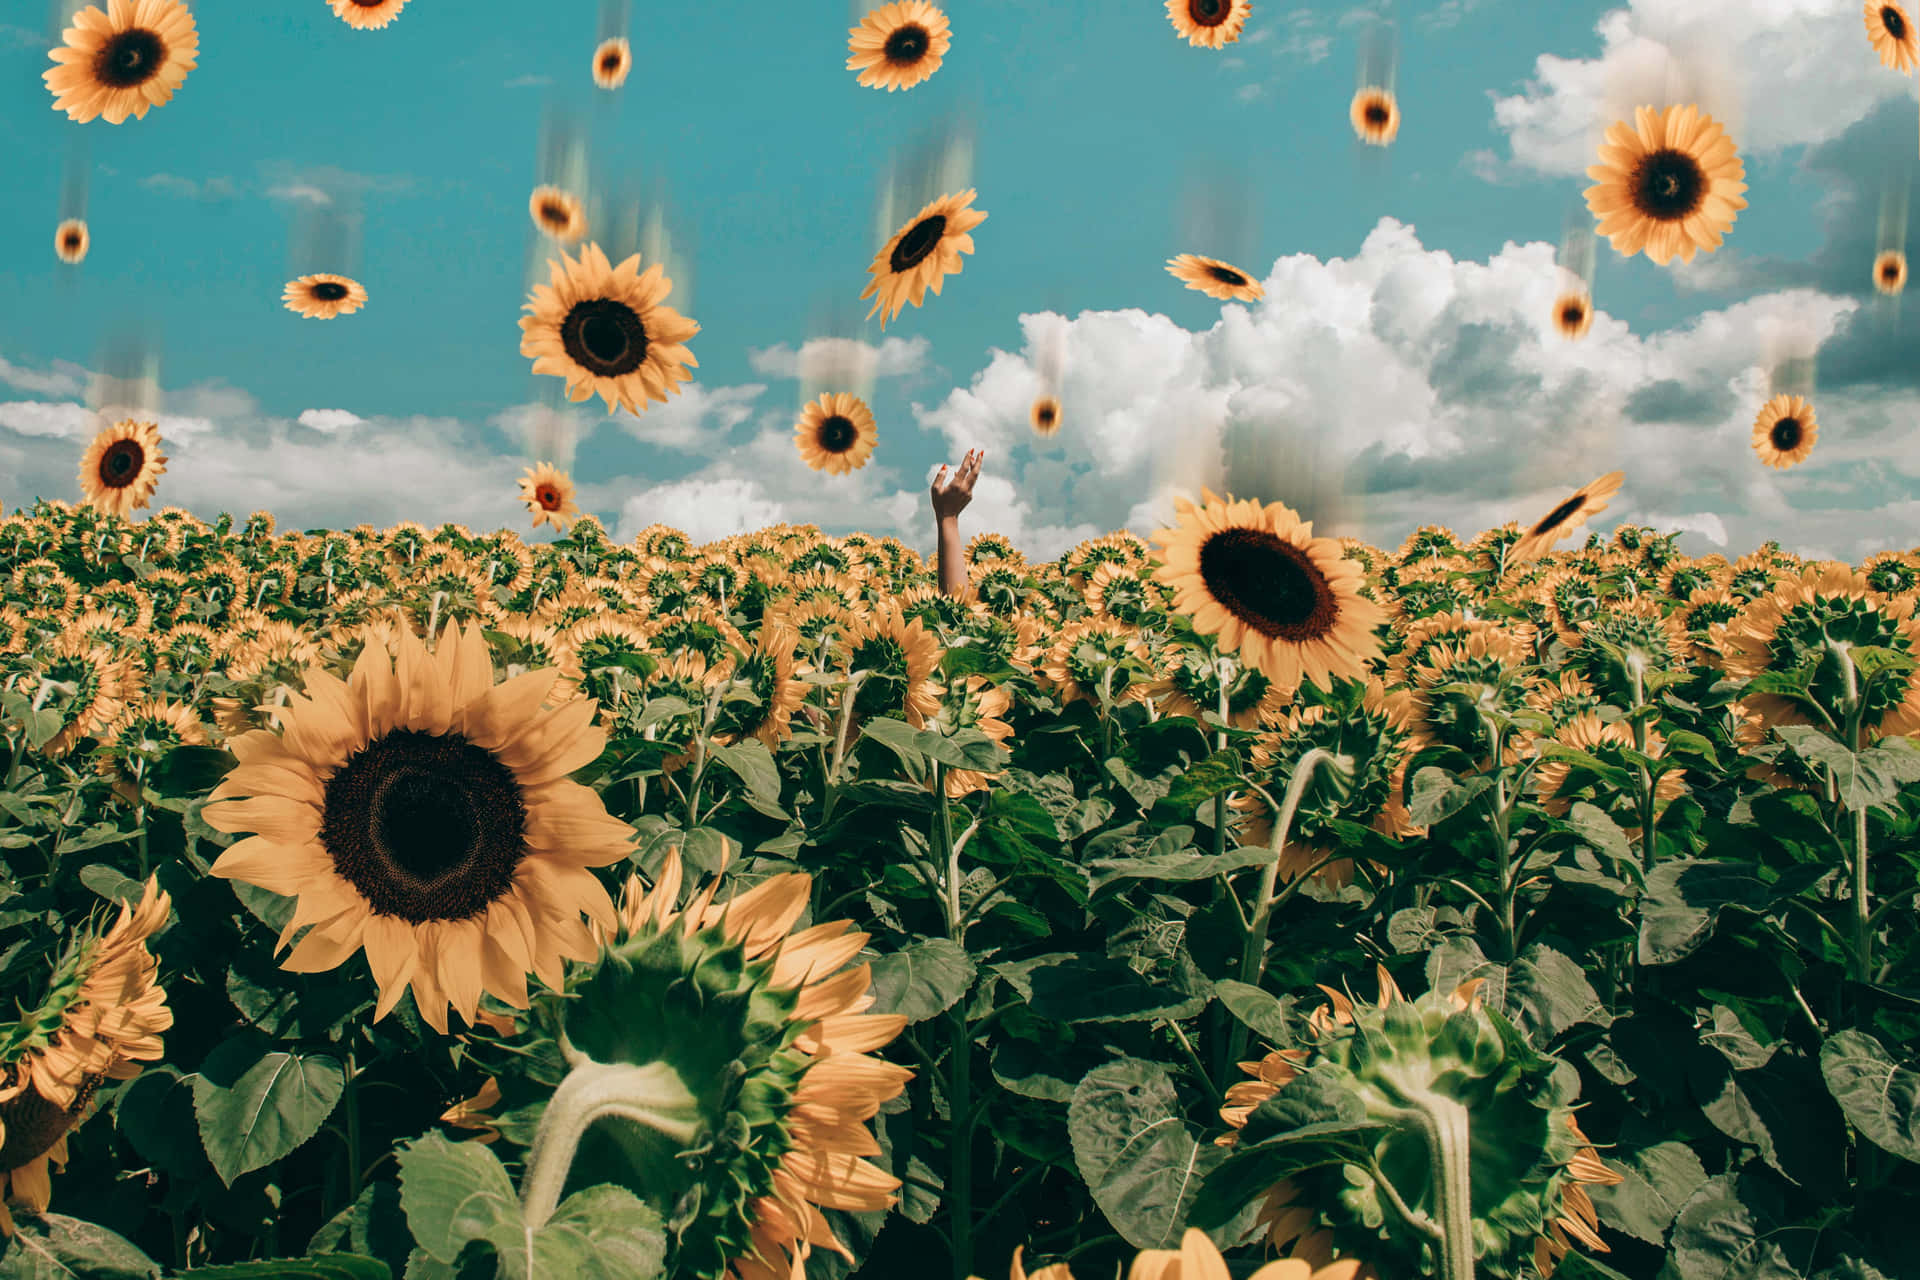 sunflowers in the field with clouds in the sky